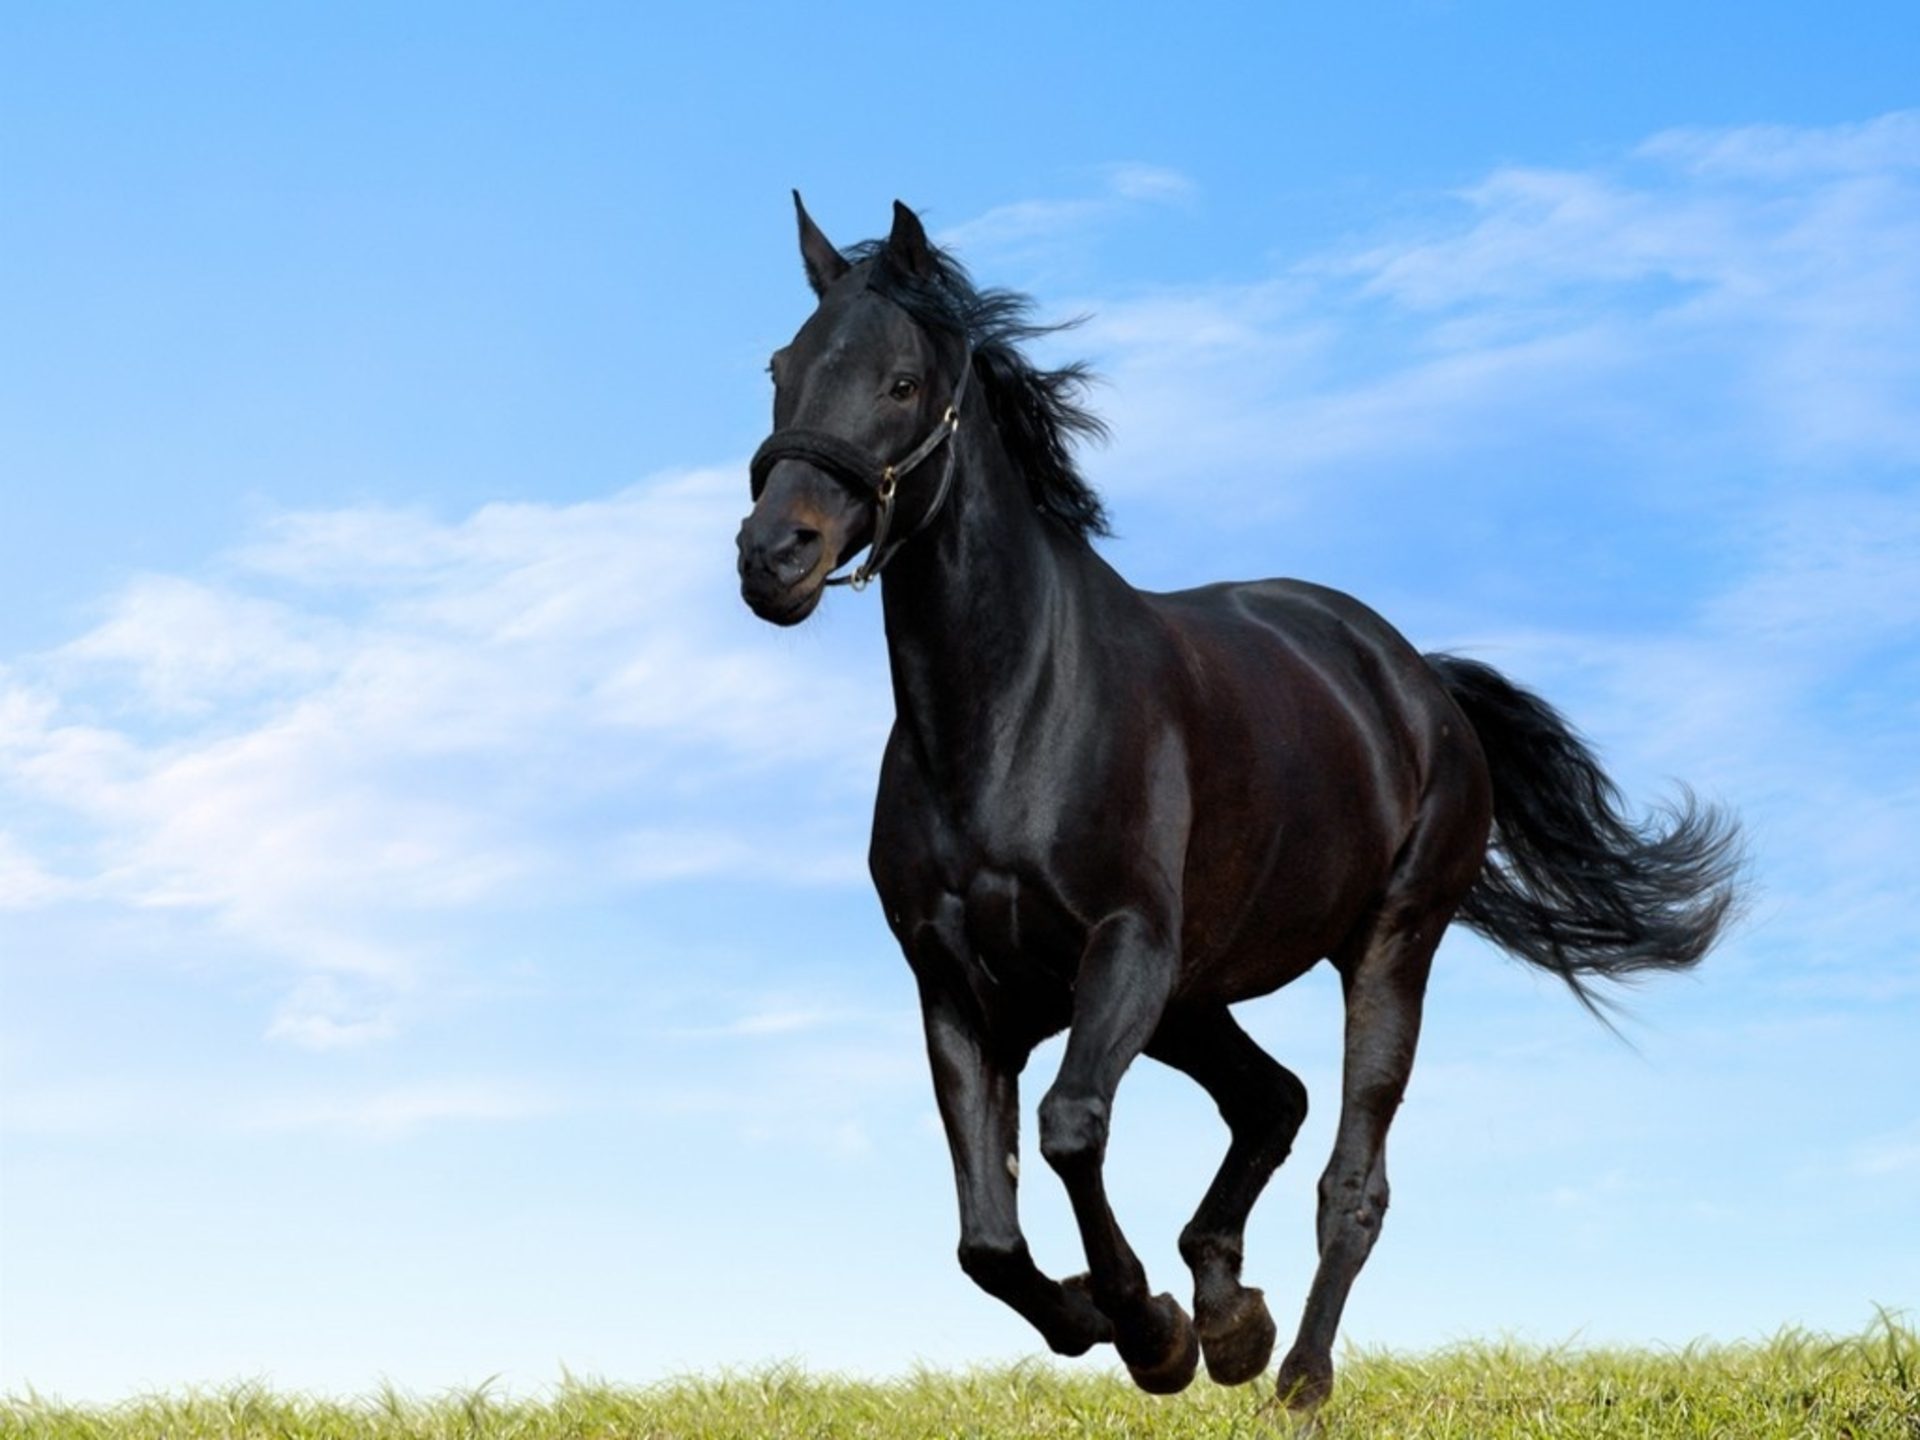 And Beautiful Wallpaper Of Arabian Horse With Marvelous Background